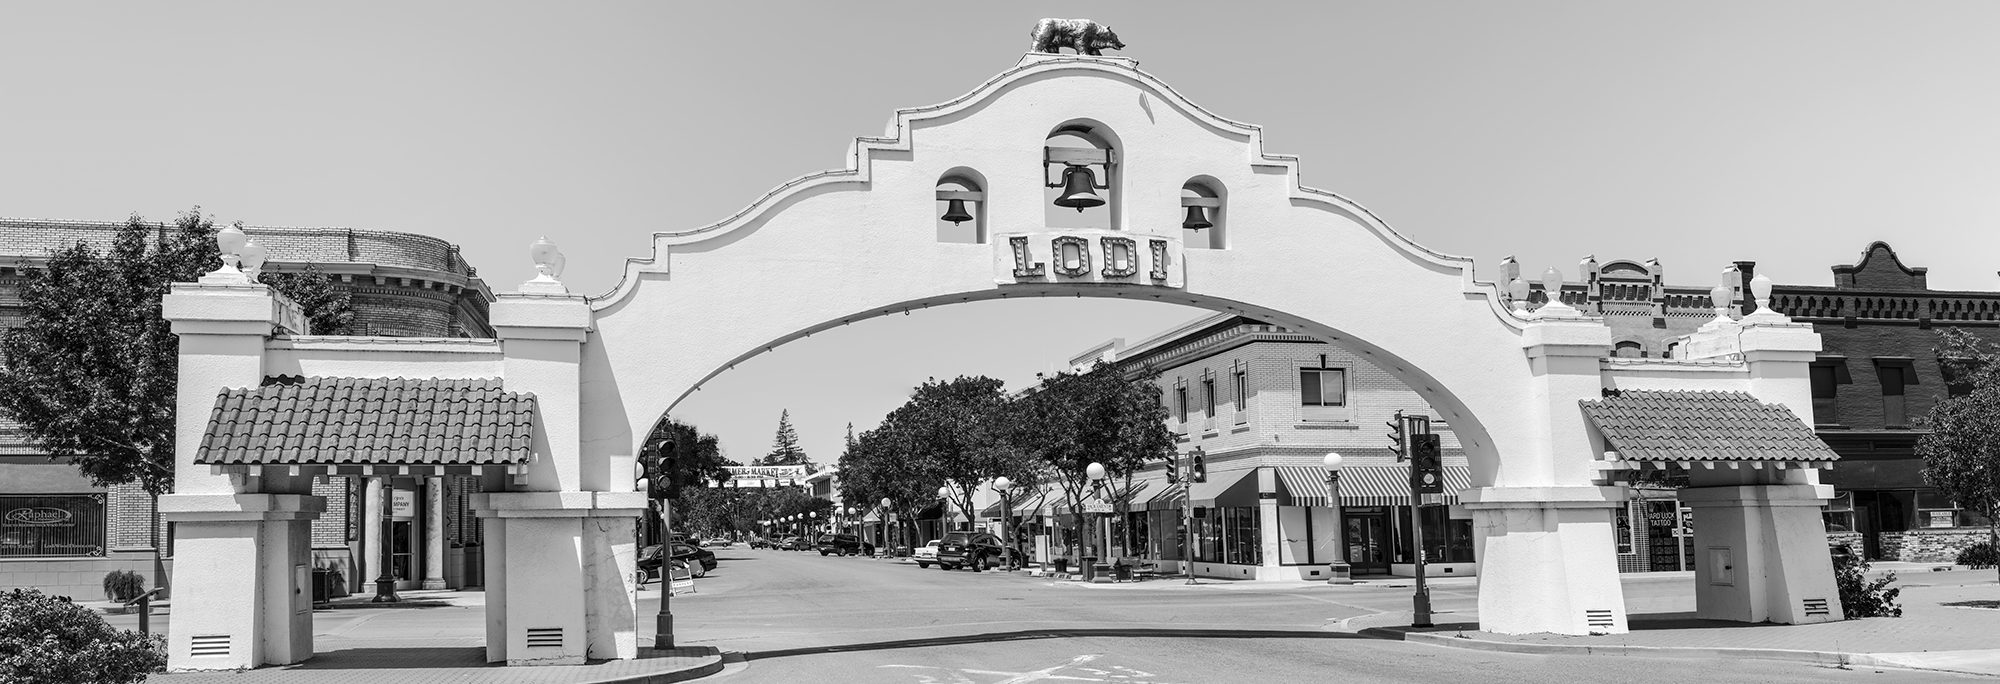 Downtown Lodi Arch San Joaquin County Central Valley California Panorama Mark Lilly Fine Art Photography